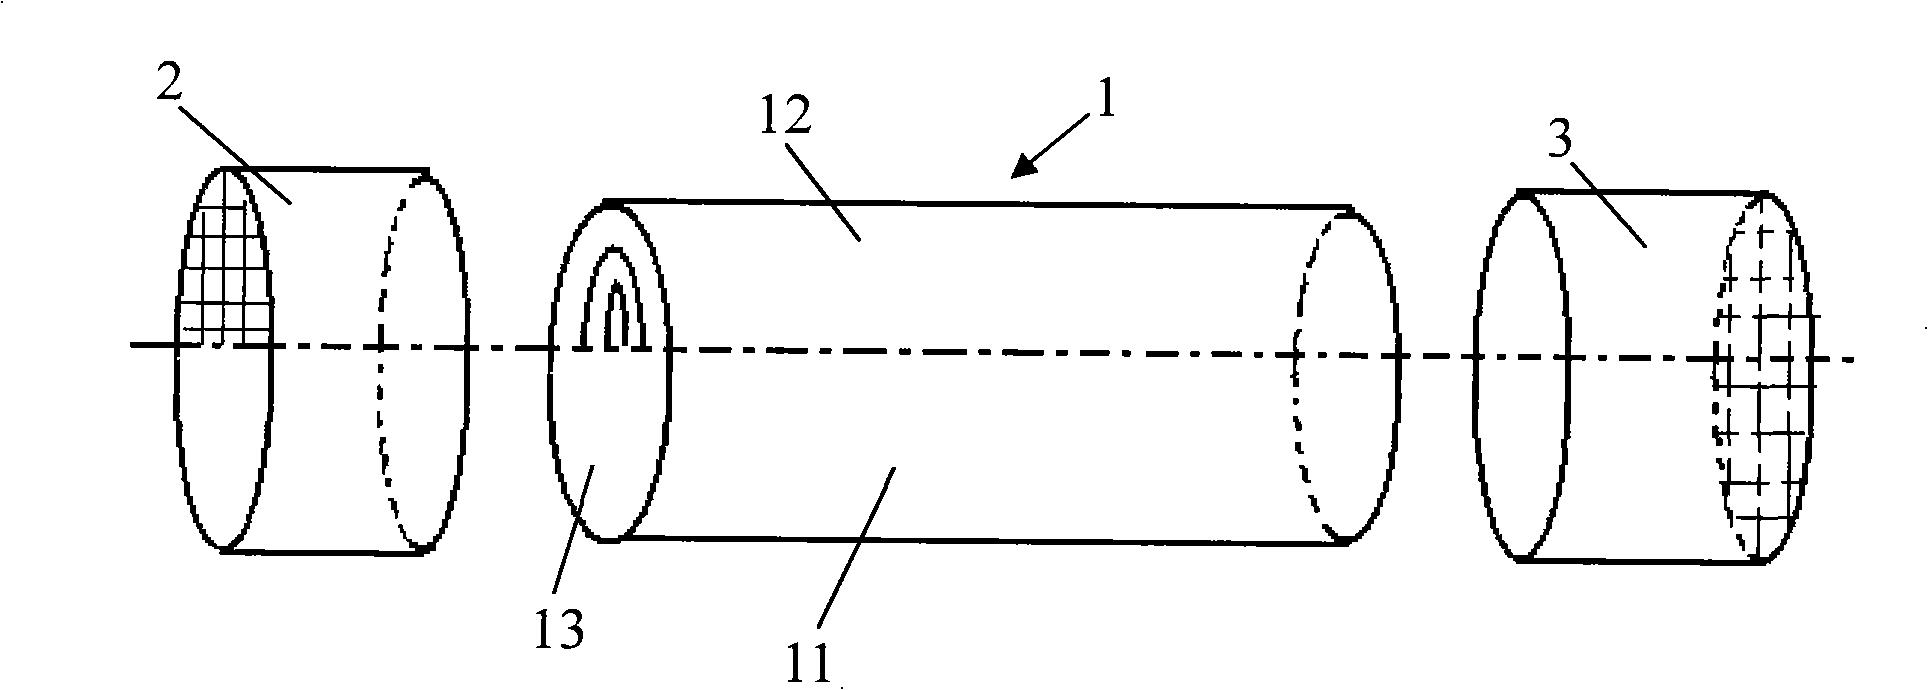 Seep guide apparatus for automatically removing water in soil